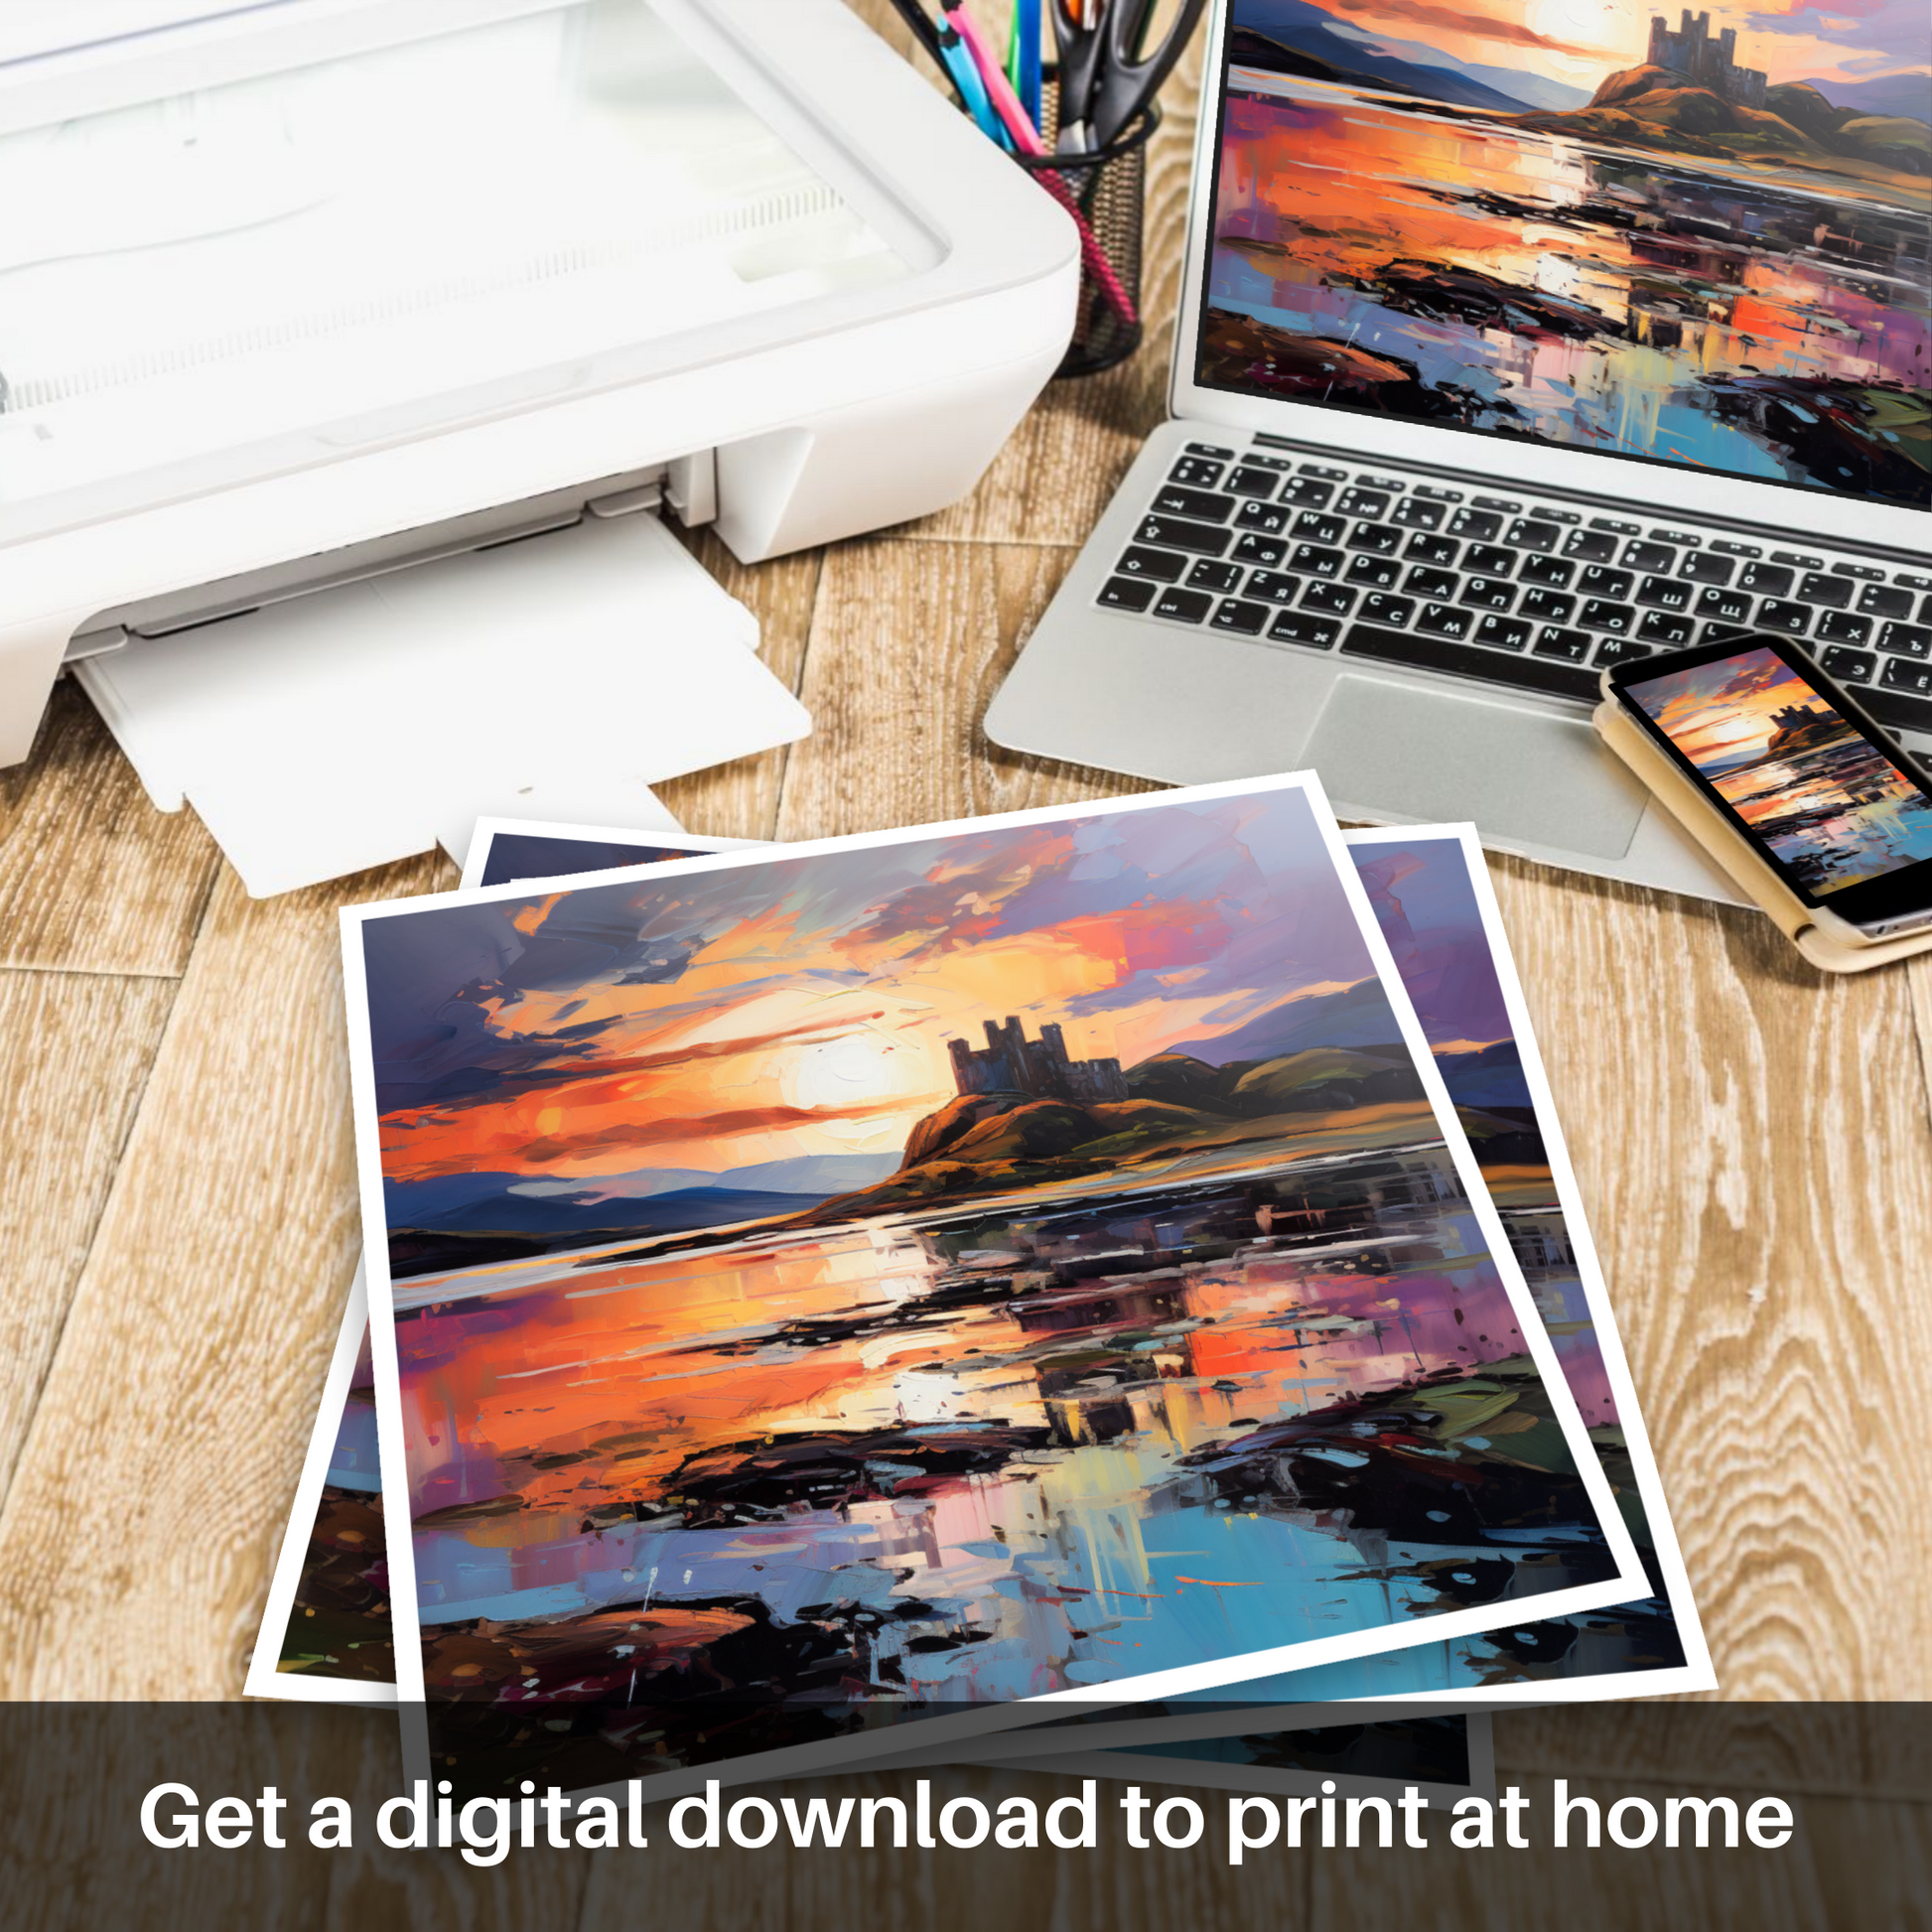 Downloadable and printable picture of Castle Stalker Bay at sunset